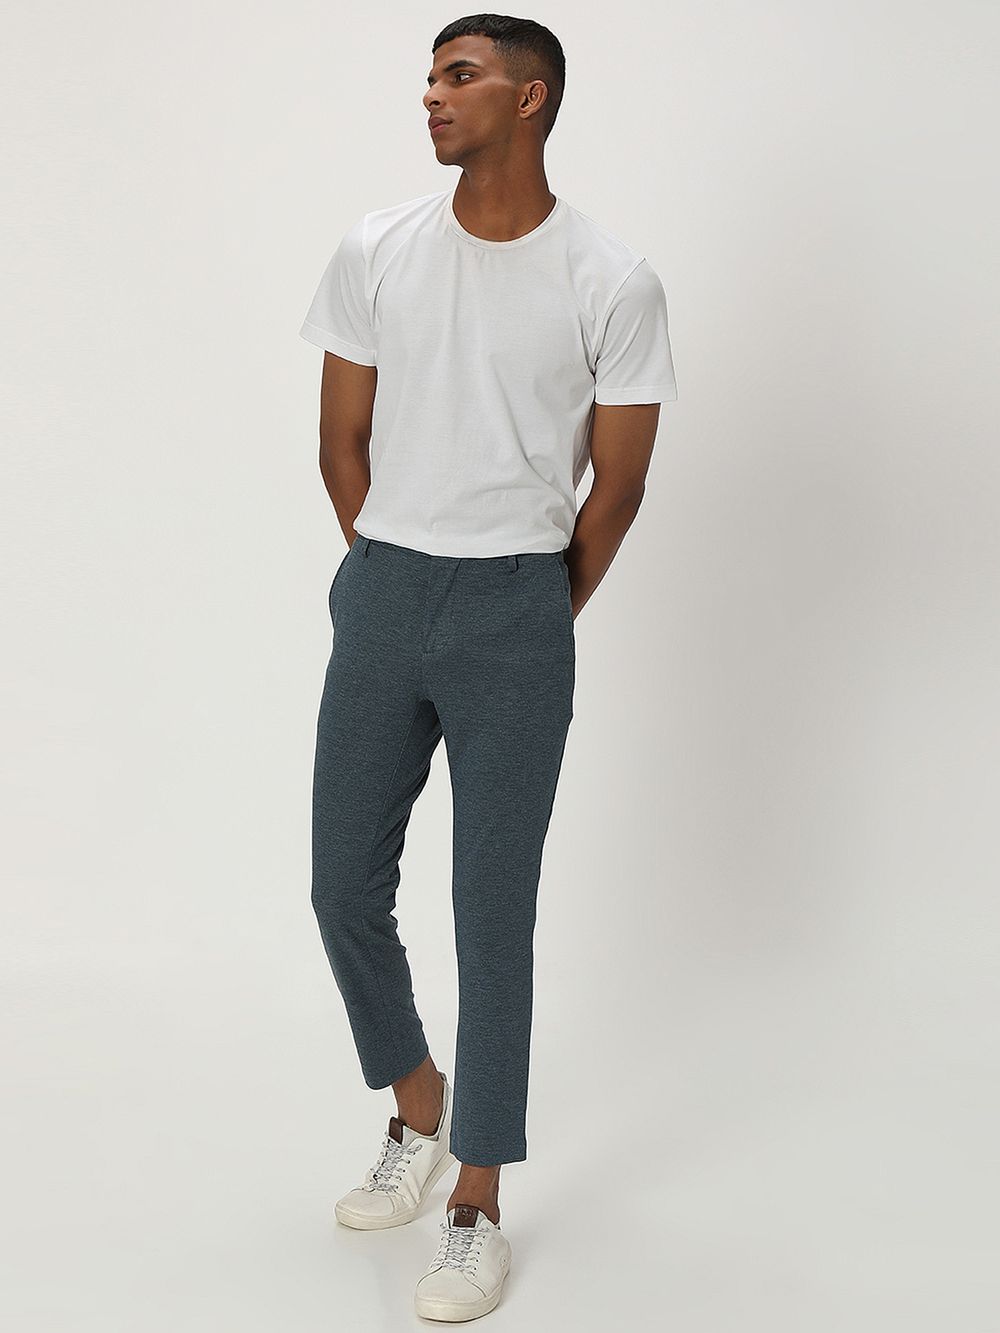 Teal Ankle Length Stretch Chinos